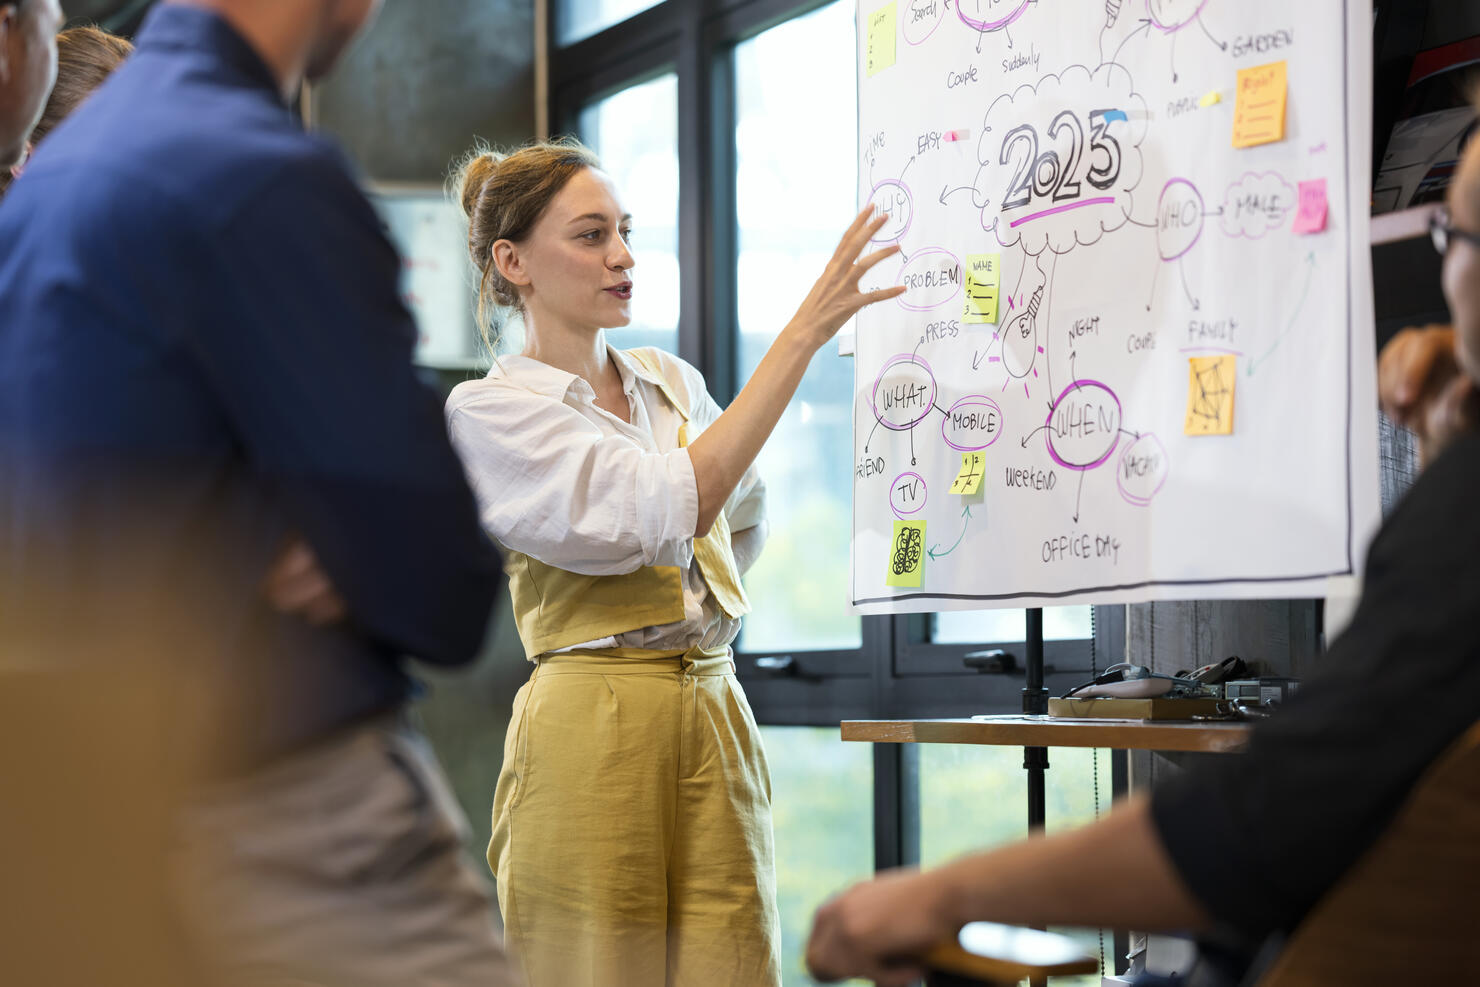 Empower Your Teams to Work Together More Effectively. A Female Business team leader present on new business workflows with her team for brainstorm ideas to manage customer project.